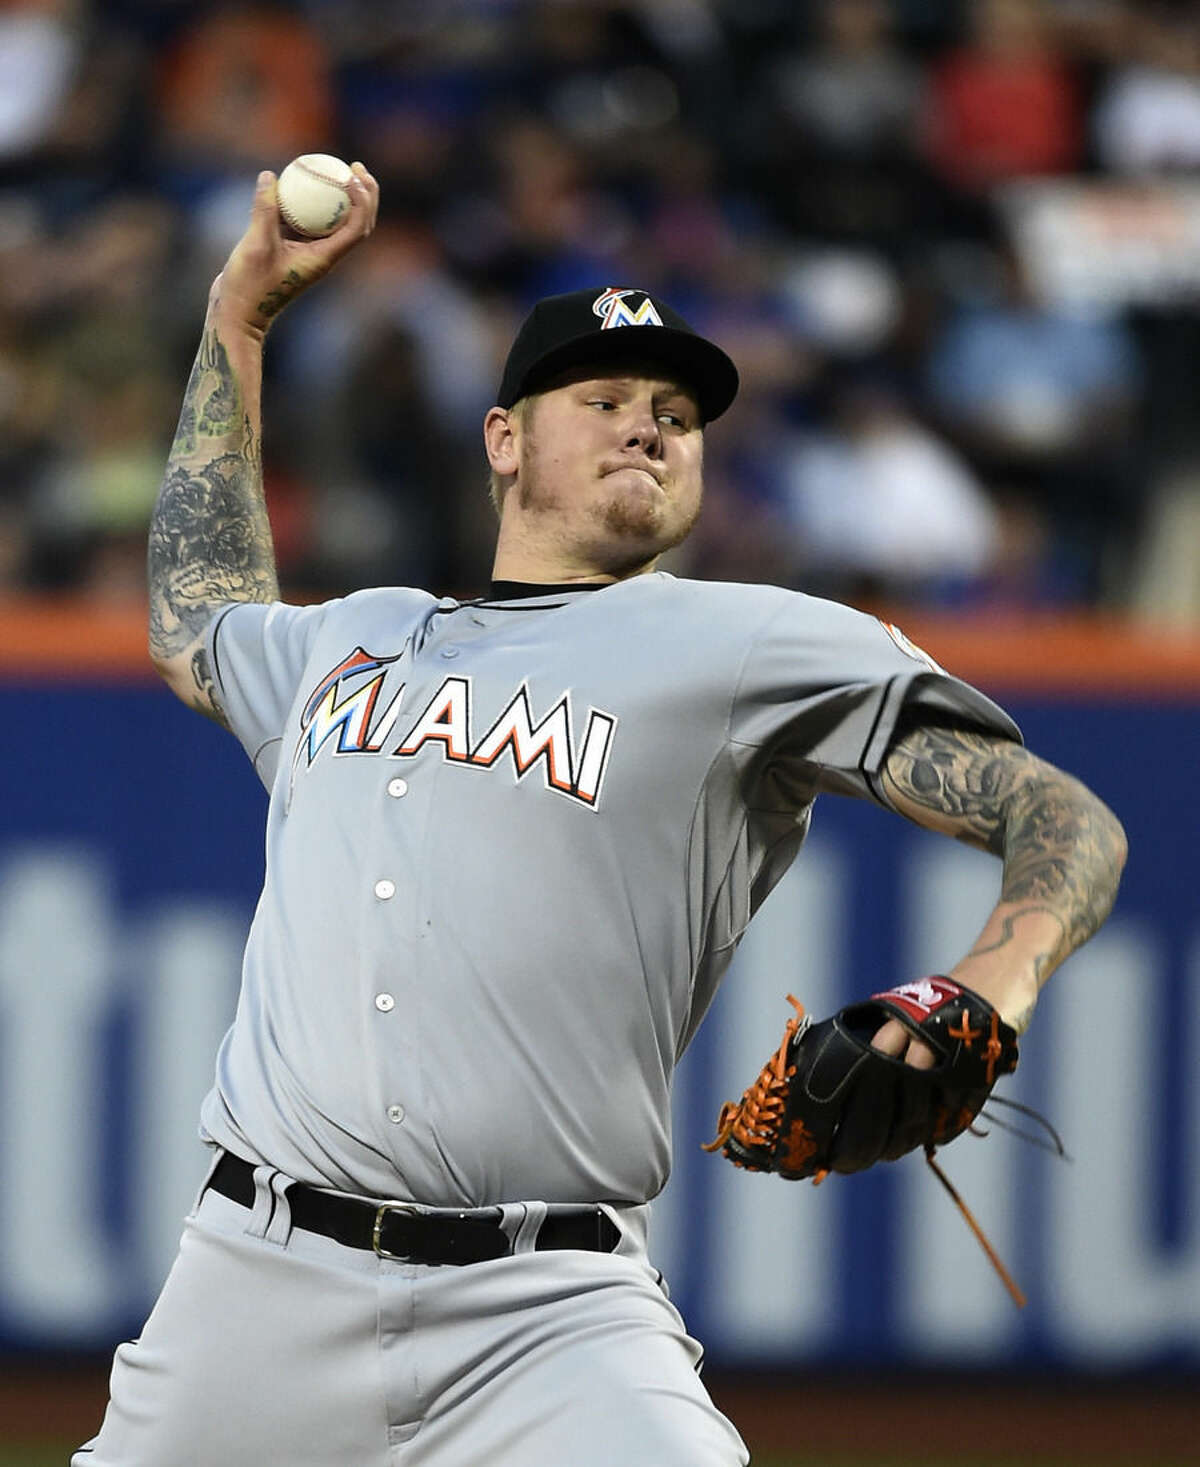 Miami Marlins starter Mat Latos pitches against the New York Mets in the first inning of a baseball game at Citi Field on Saturday, April 18, 2015, in New York. (AP Photo/Kathy Kmonicek)